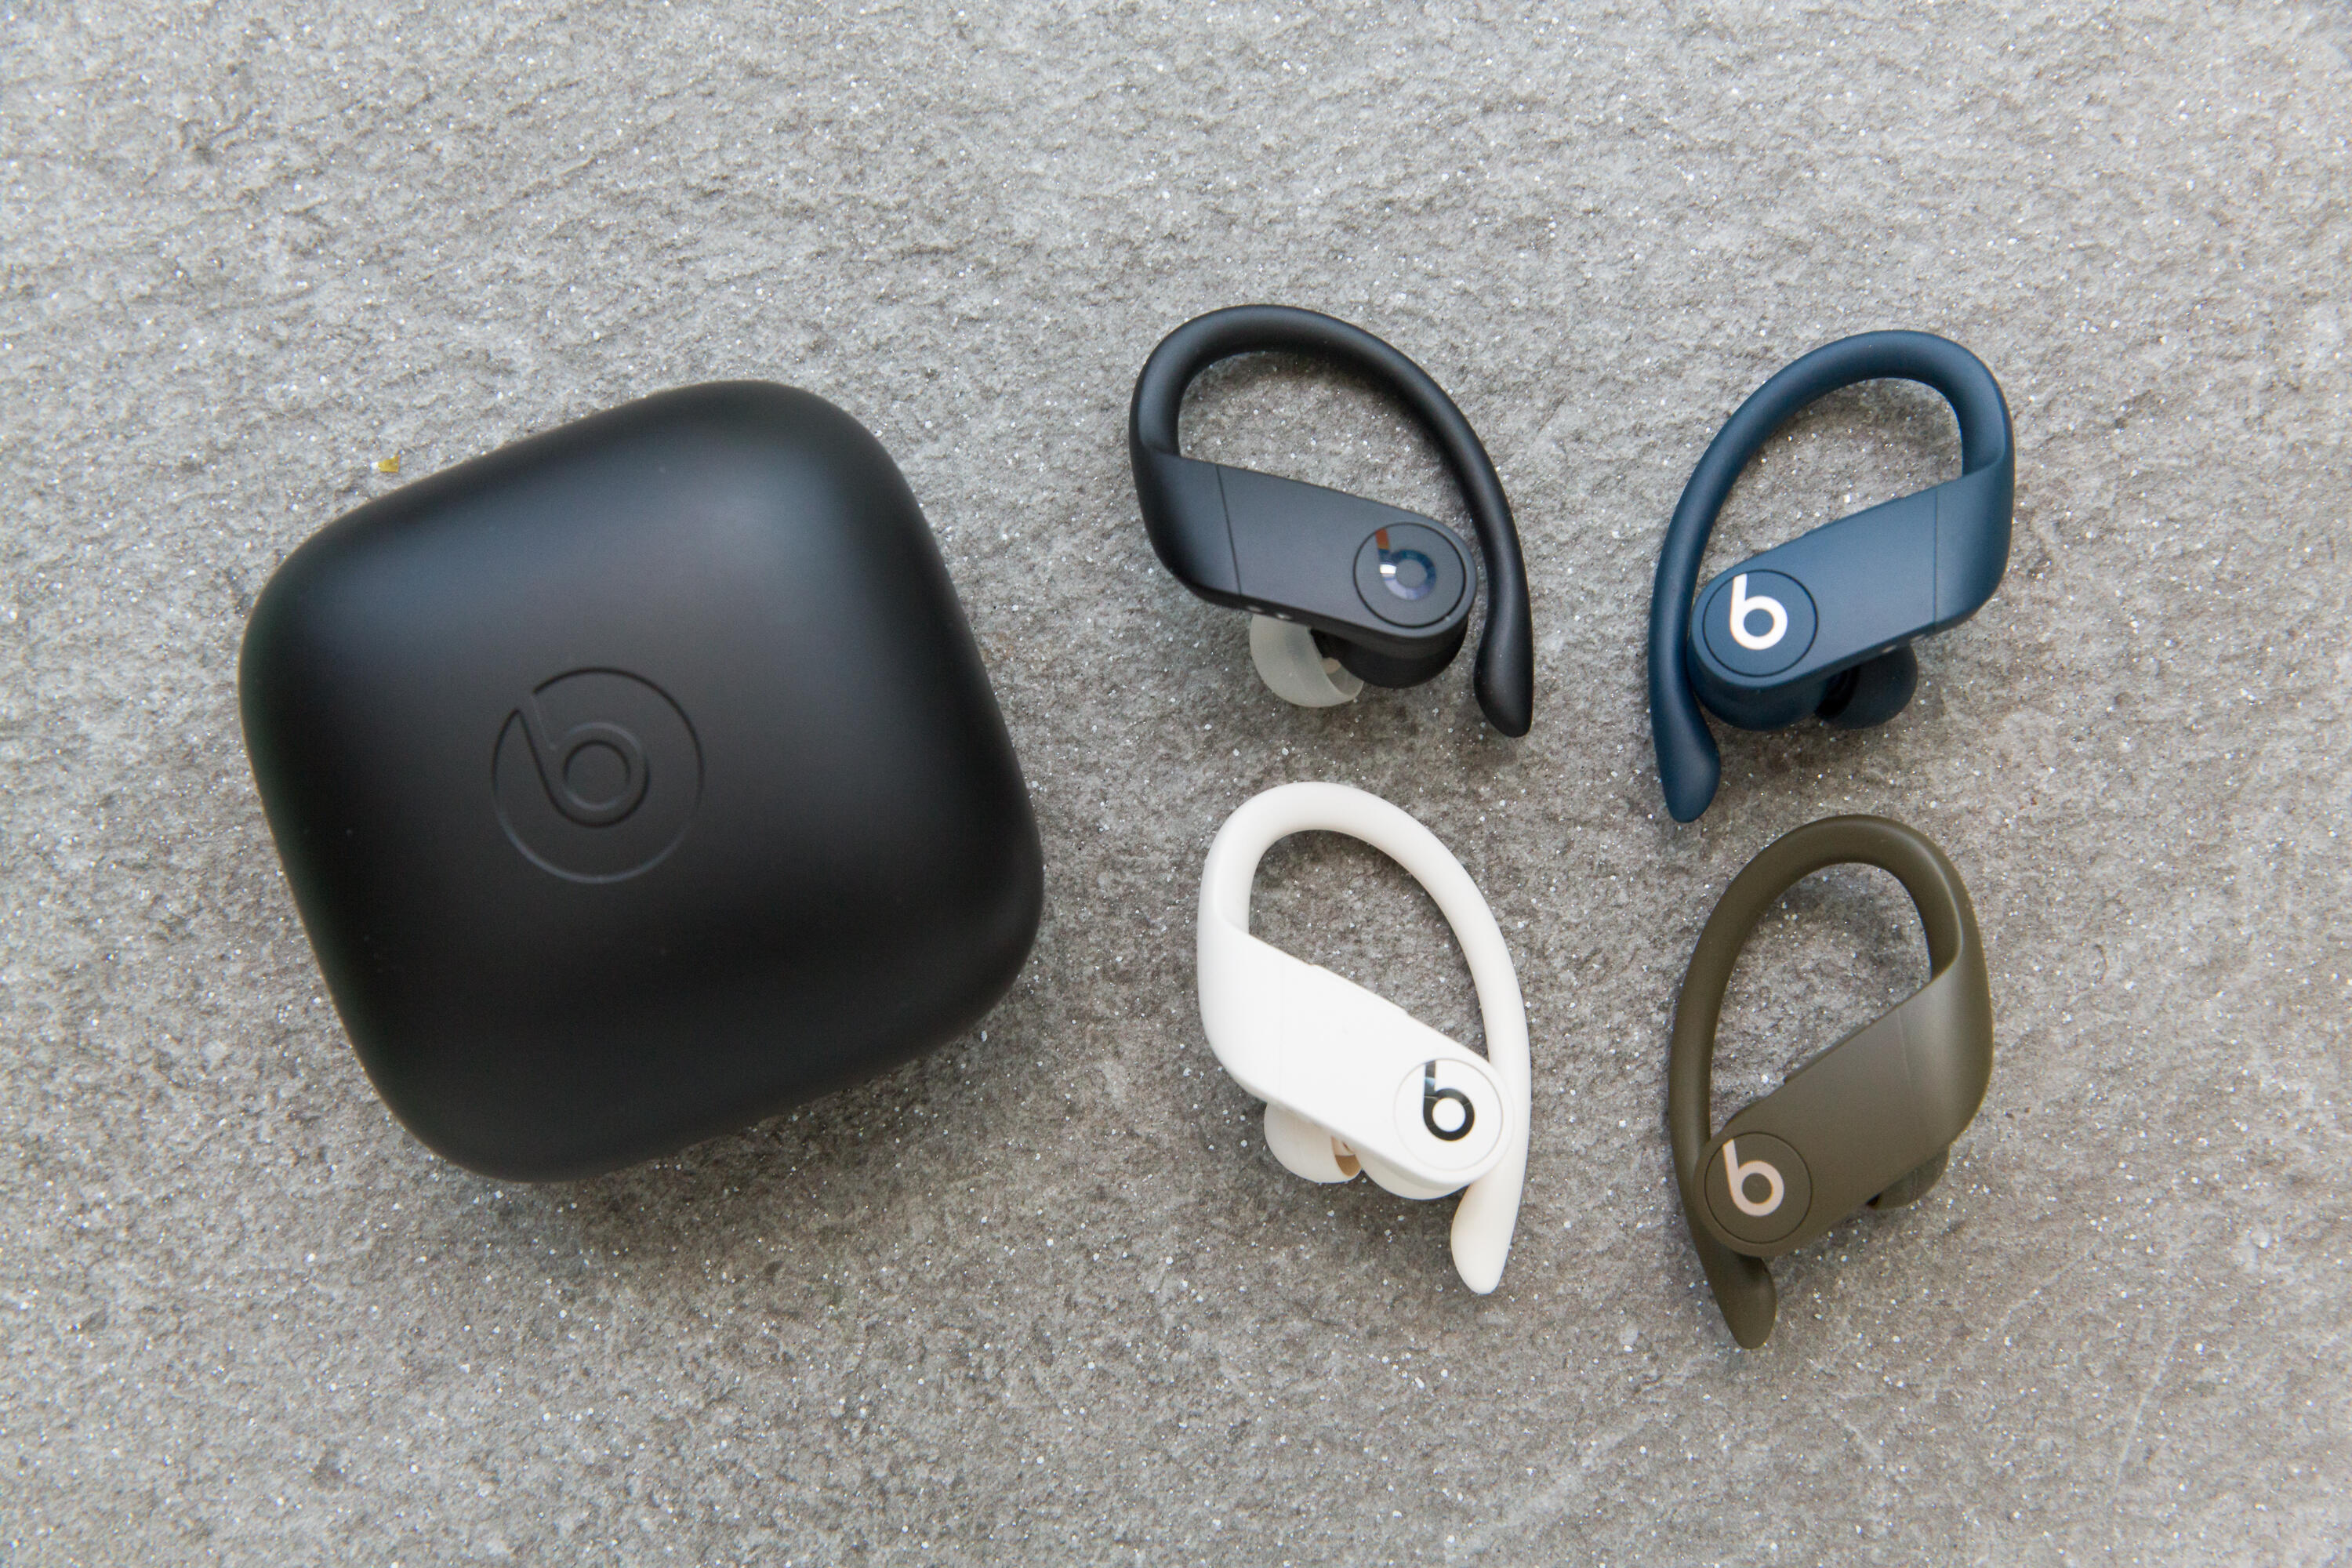 when will other colors of powerbeats pro be available